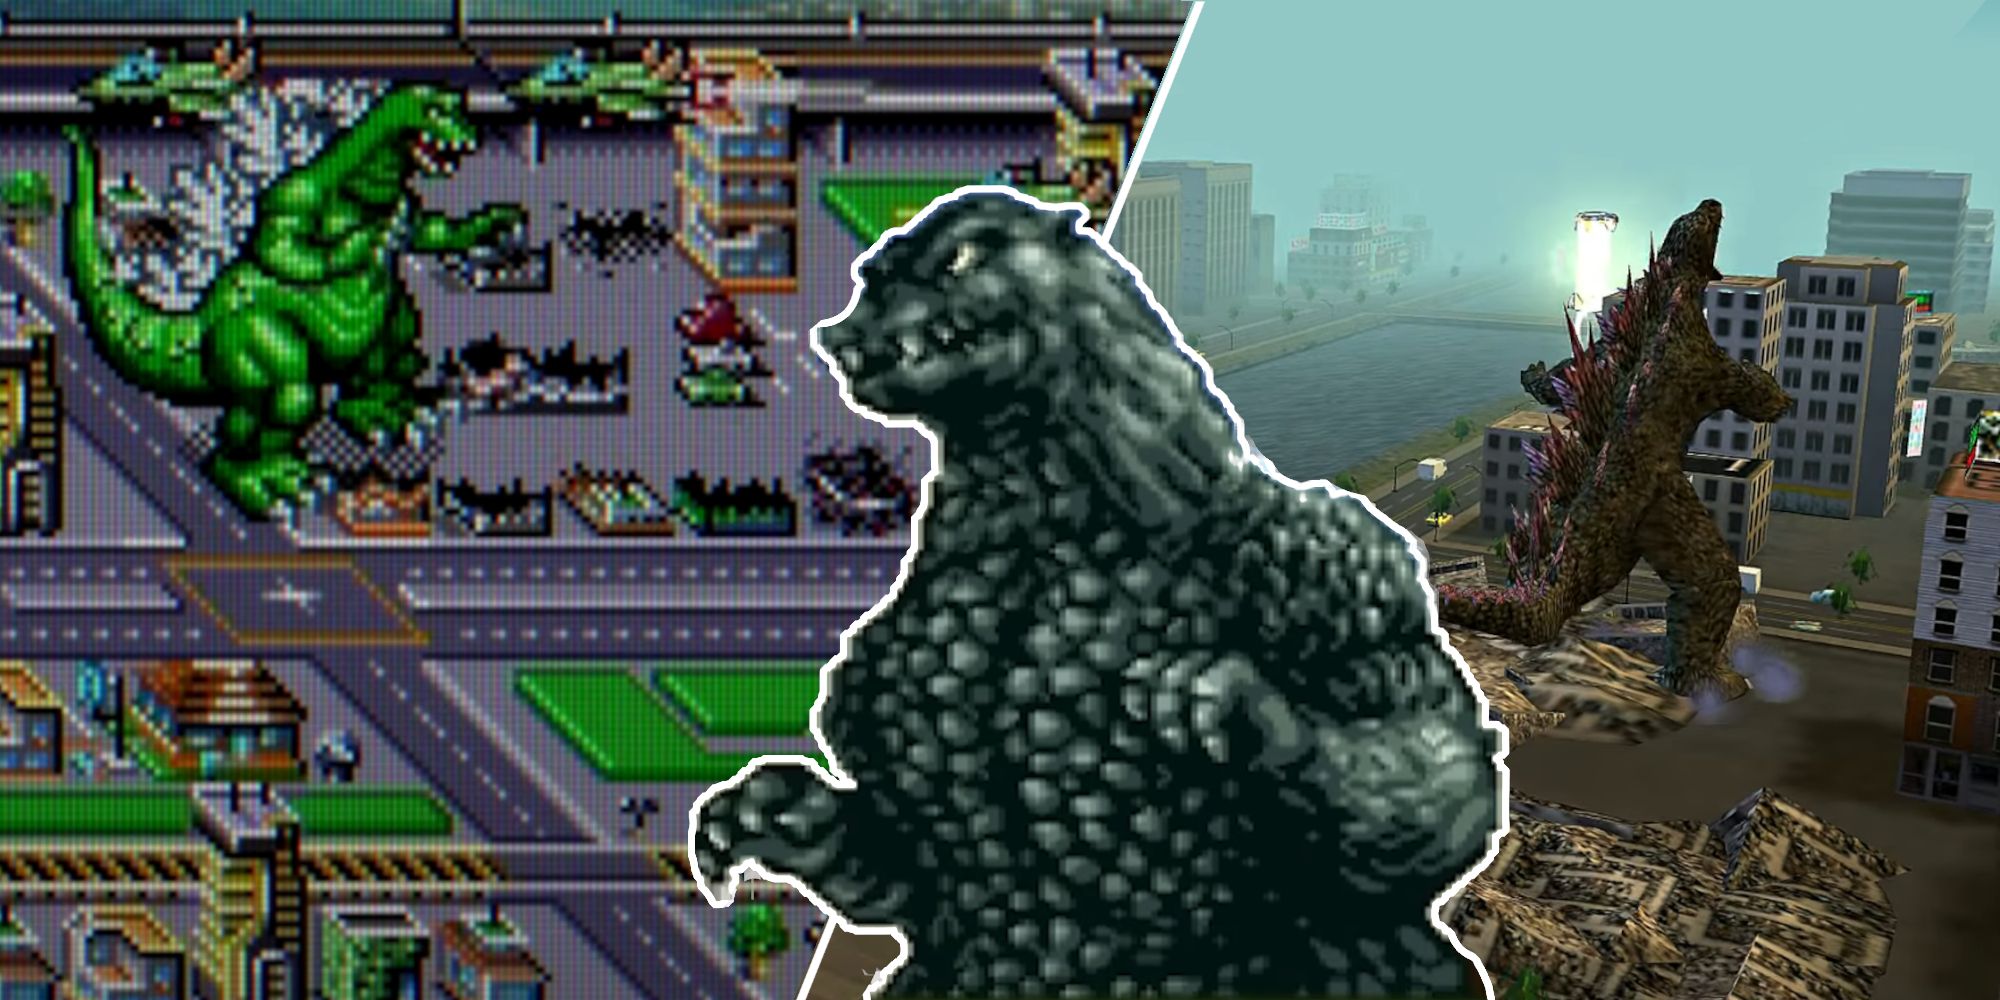 Godzilla split image with Destruction on the left and Save the Earth on the right